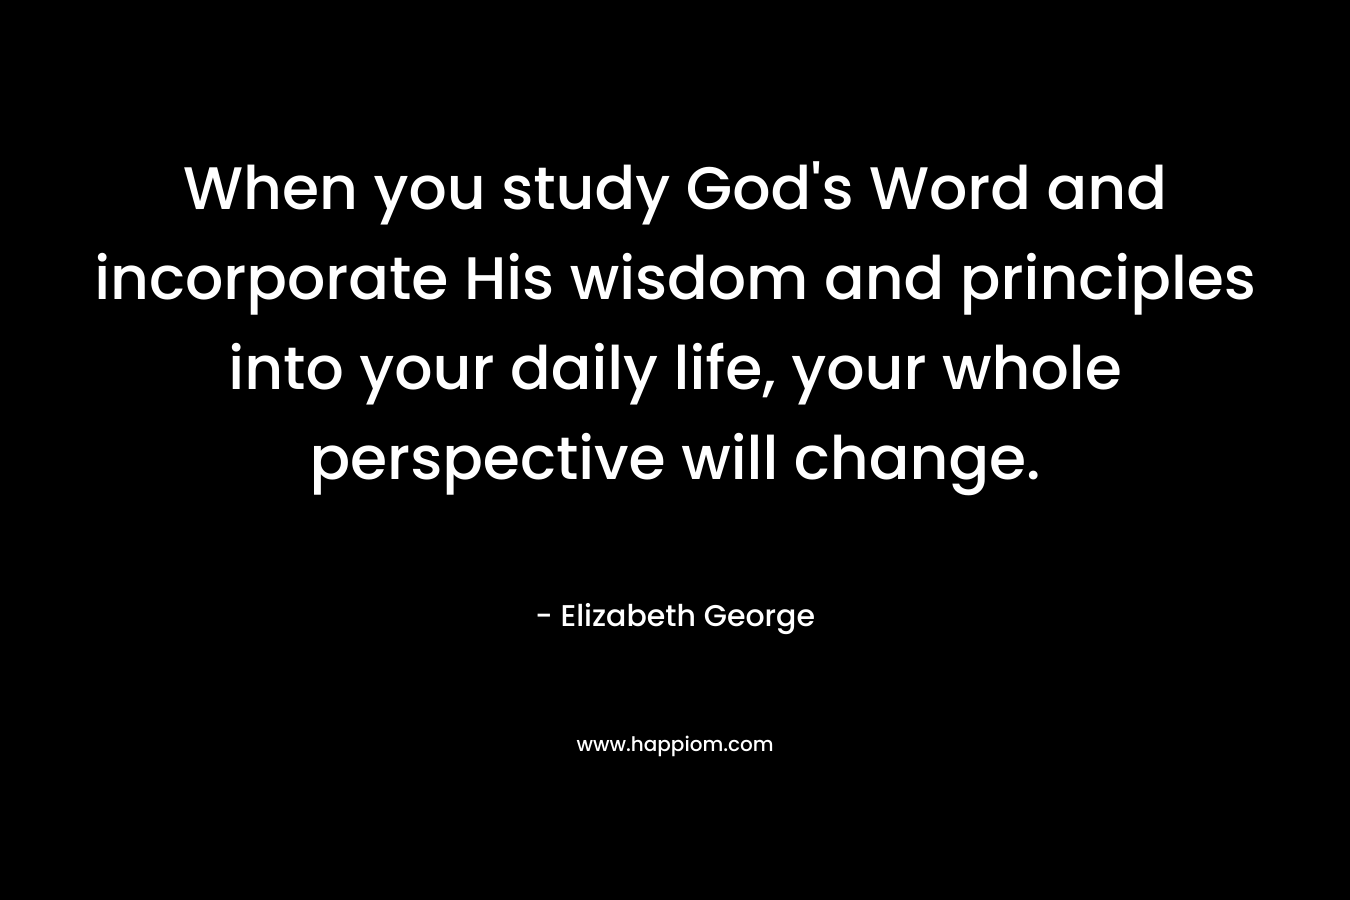 When you study God’s Word and incorporate His wisdom and principles into your daily life, your whole perspective will change. – Elizabeth George